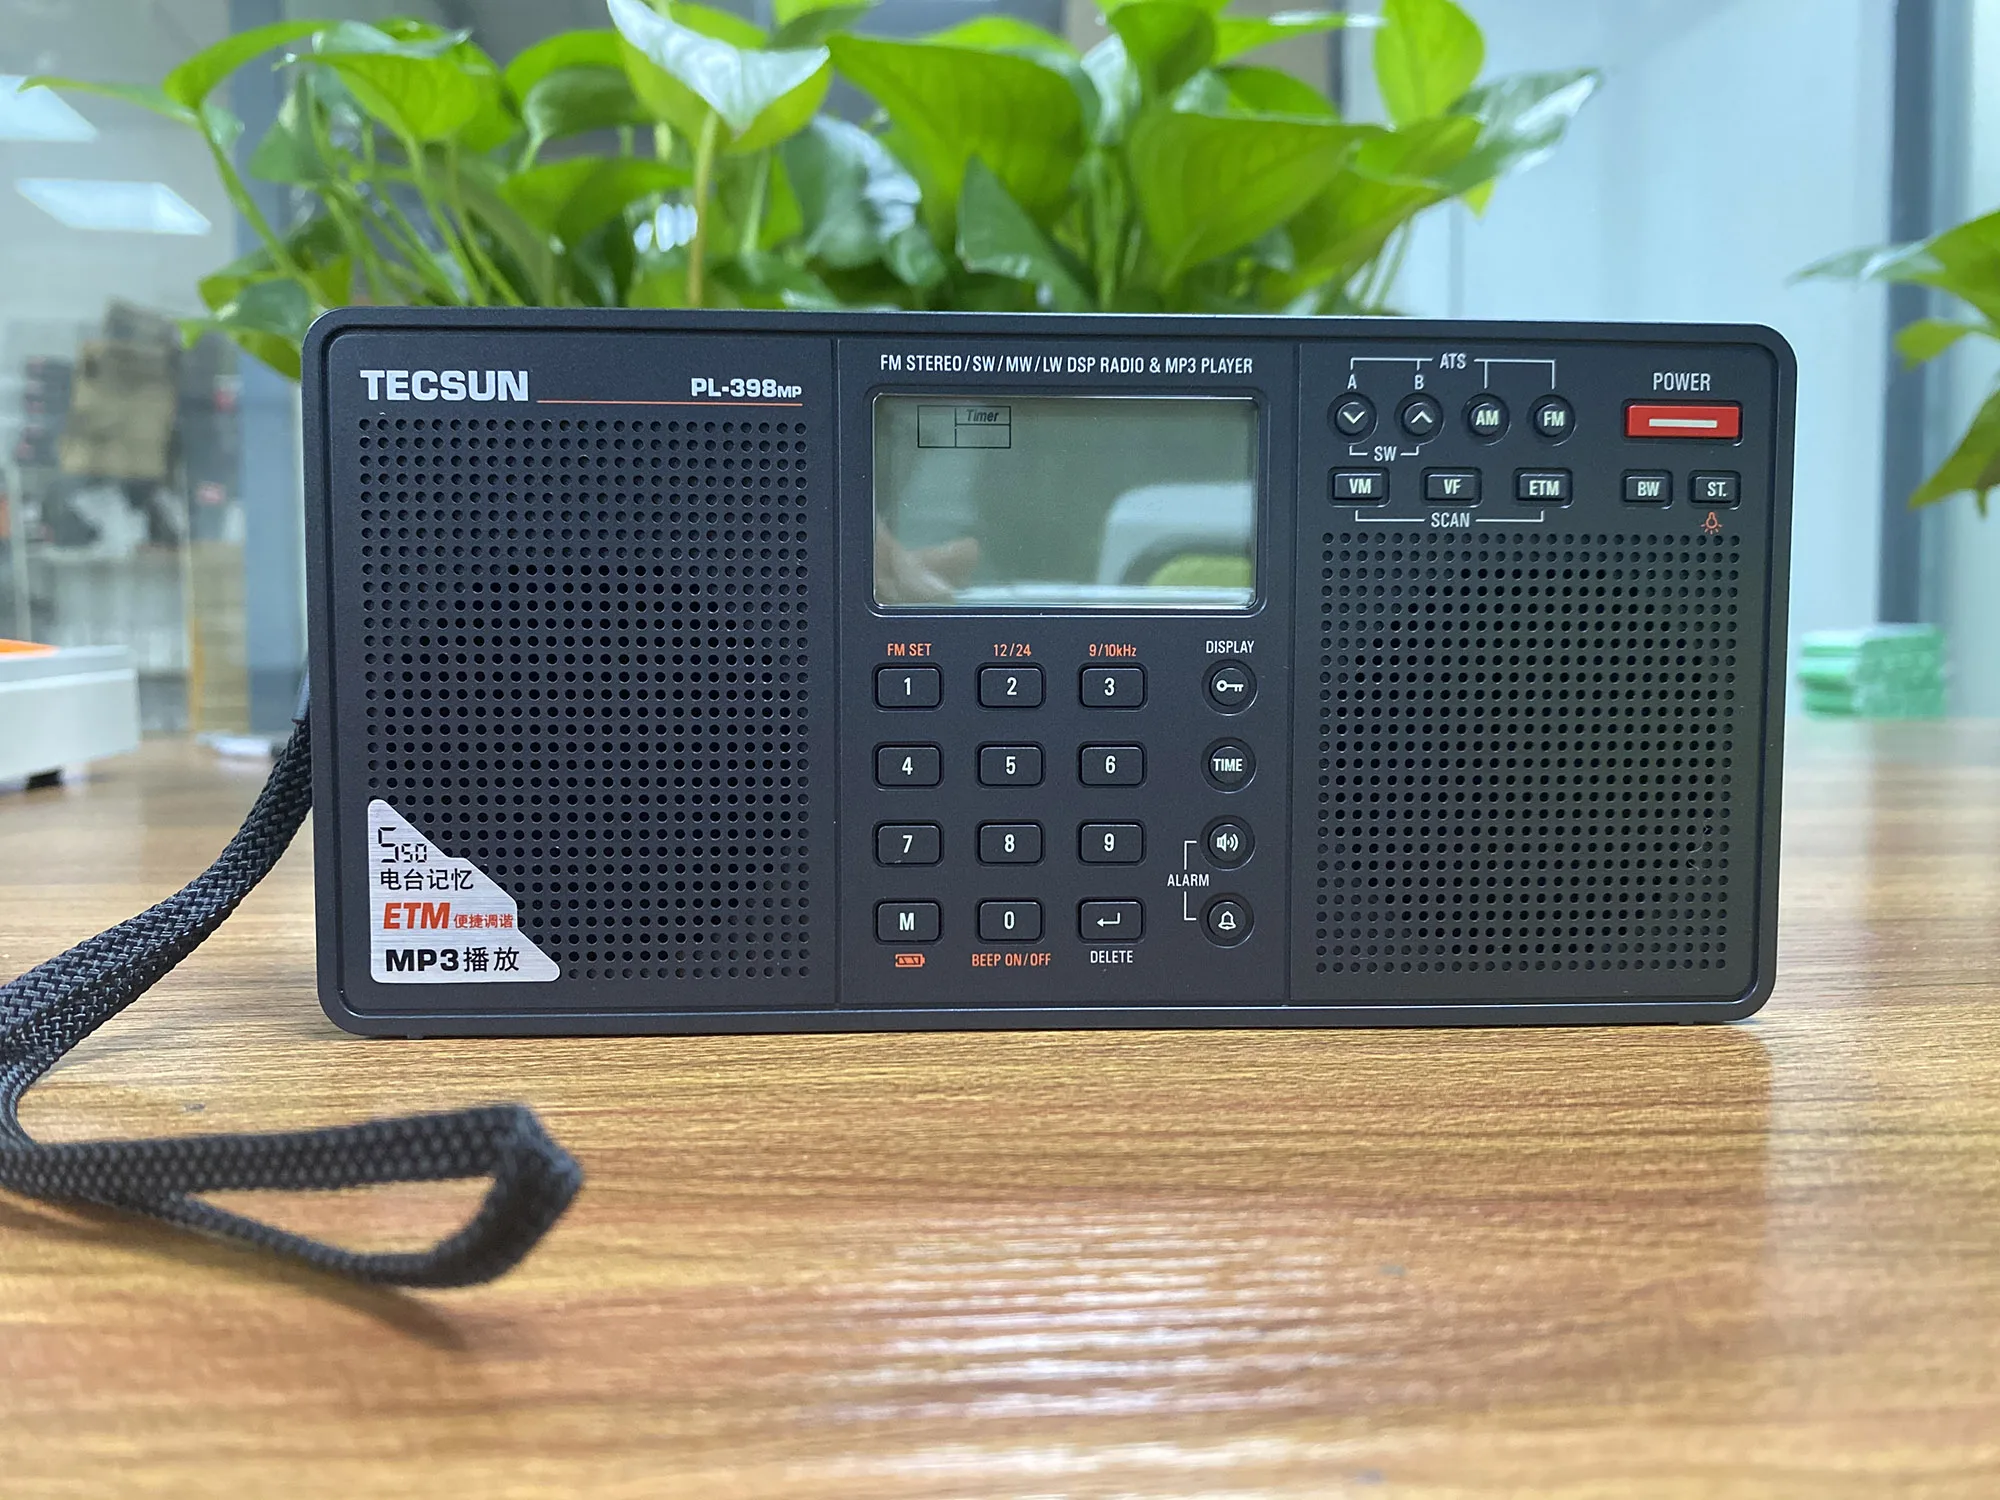 Tecsun PL-398MP Stereo Radio FM Portable Full Band Digital Tuning ETM ATS DSP Dual Speakers Receiver MP3 Player Support TF Card images - 6